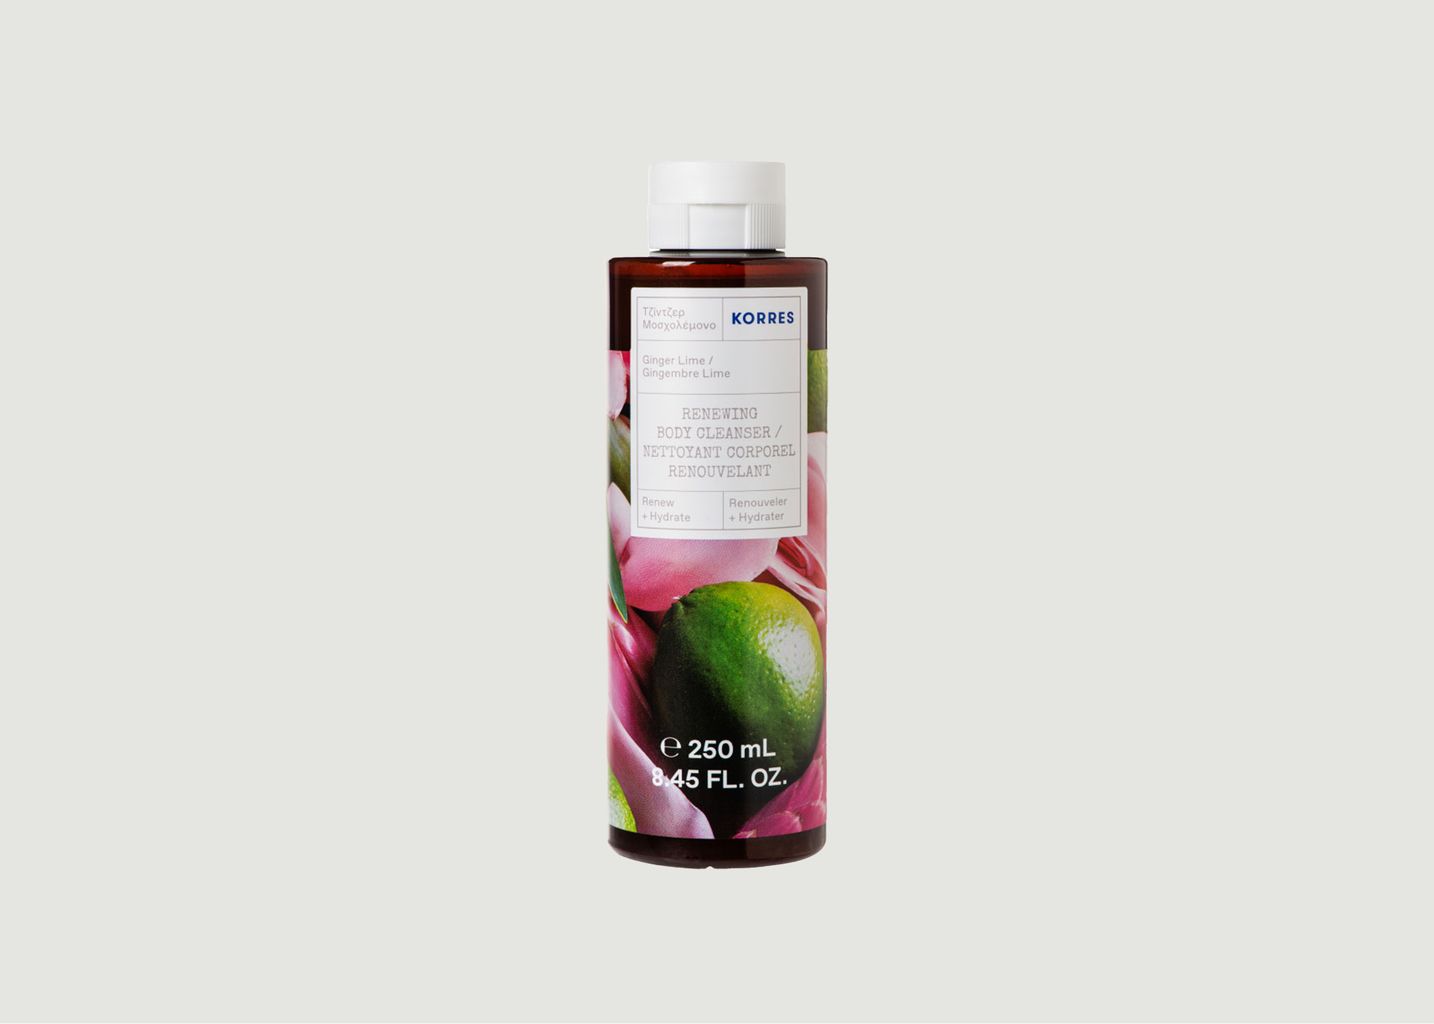 Gel douche gingembre lime 250ml  - Korres